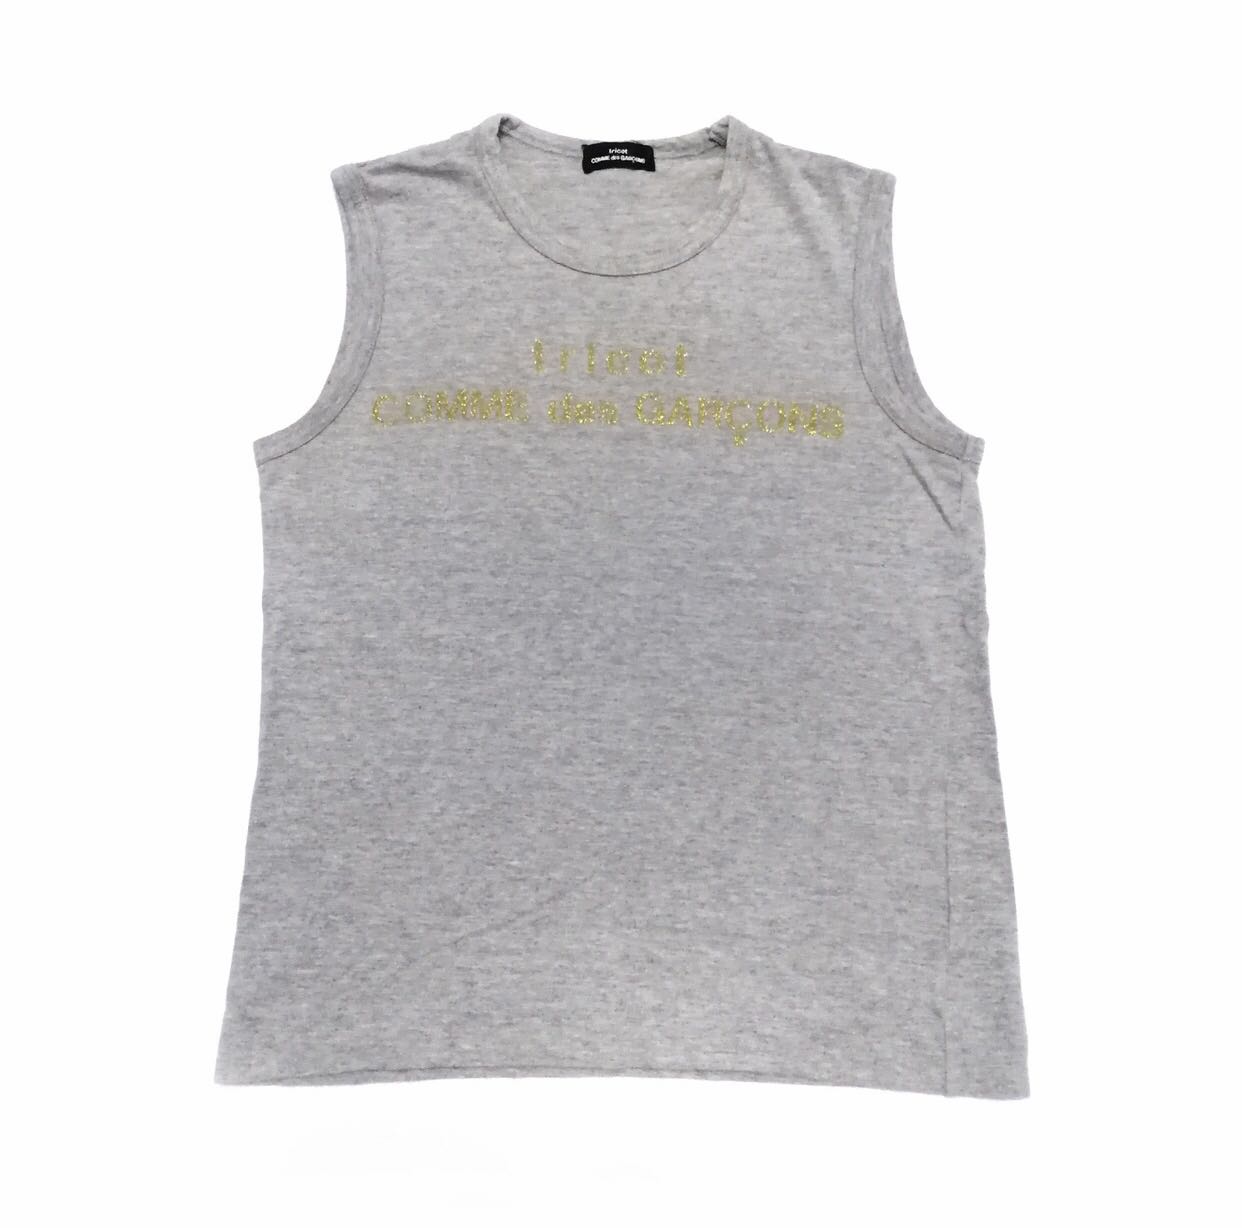 🔥 2001 Comme des garcons tricot sleeveless glitter gold logo - 1